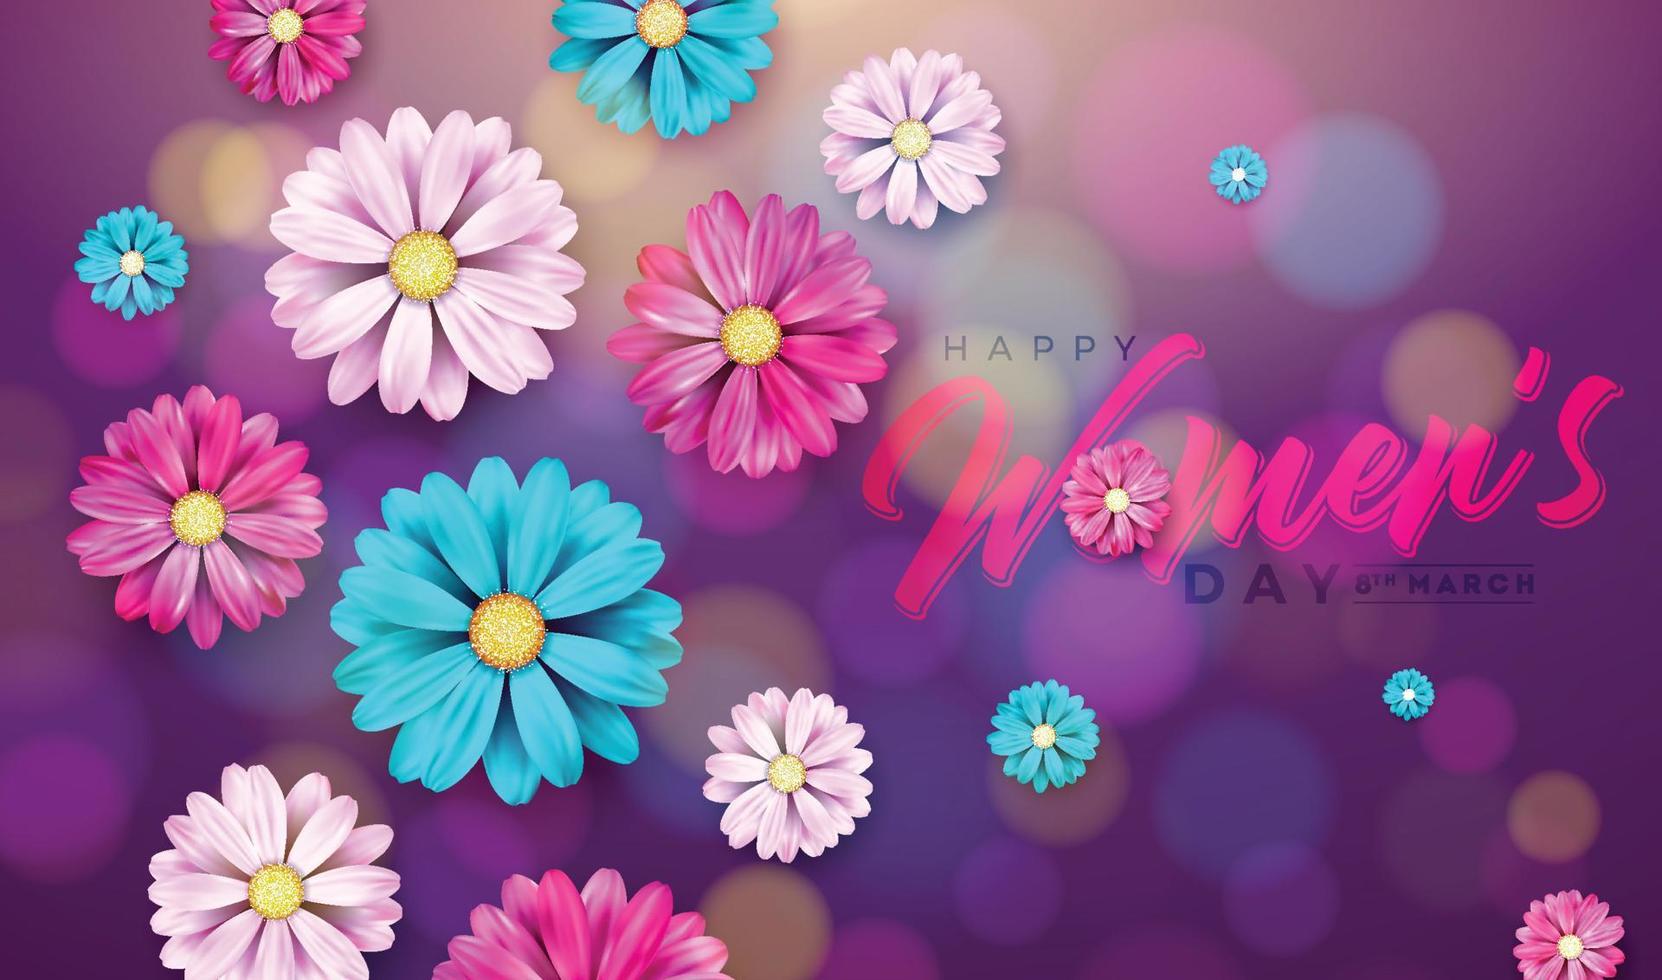 Happy Women's Day Design with Flower and Typography Letter on purple Background vector